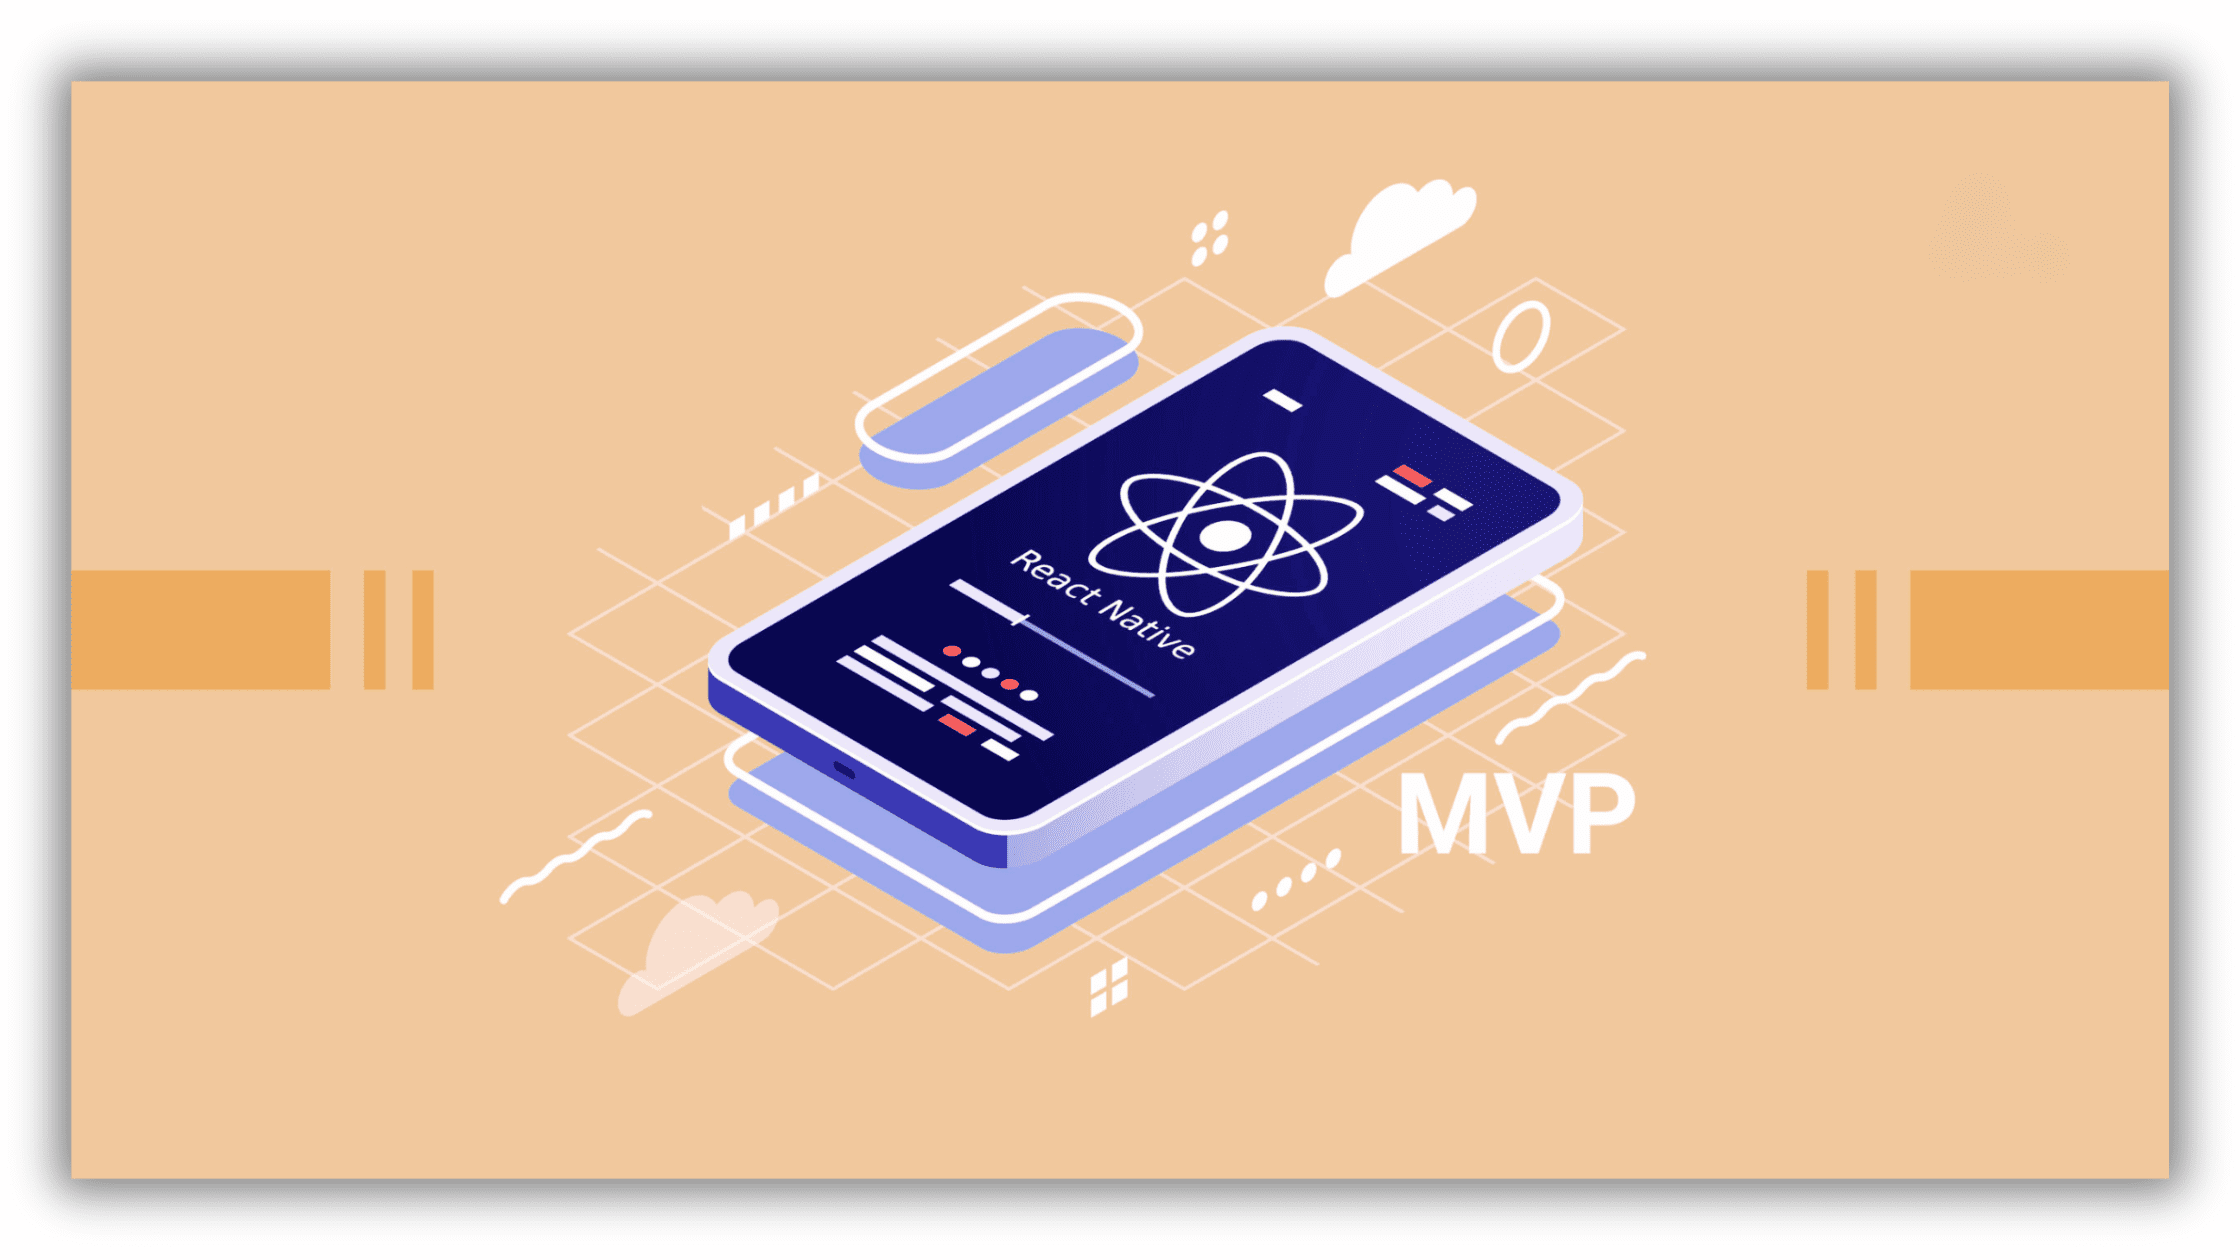 Why is React Native Better for MVP Development?